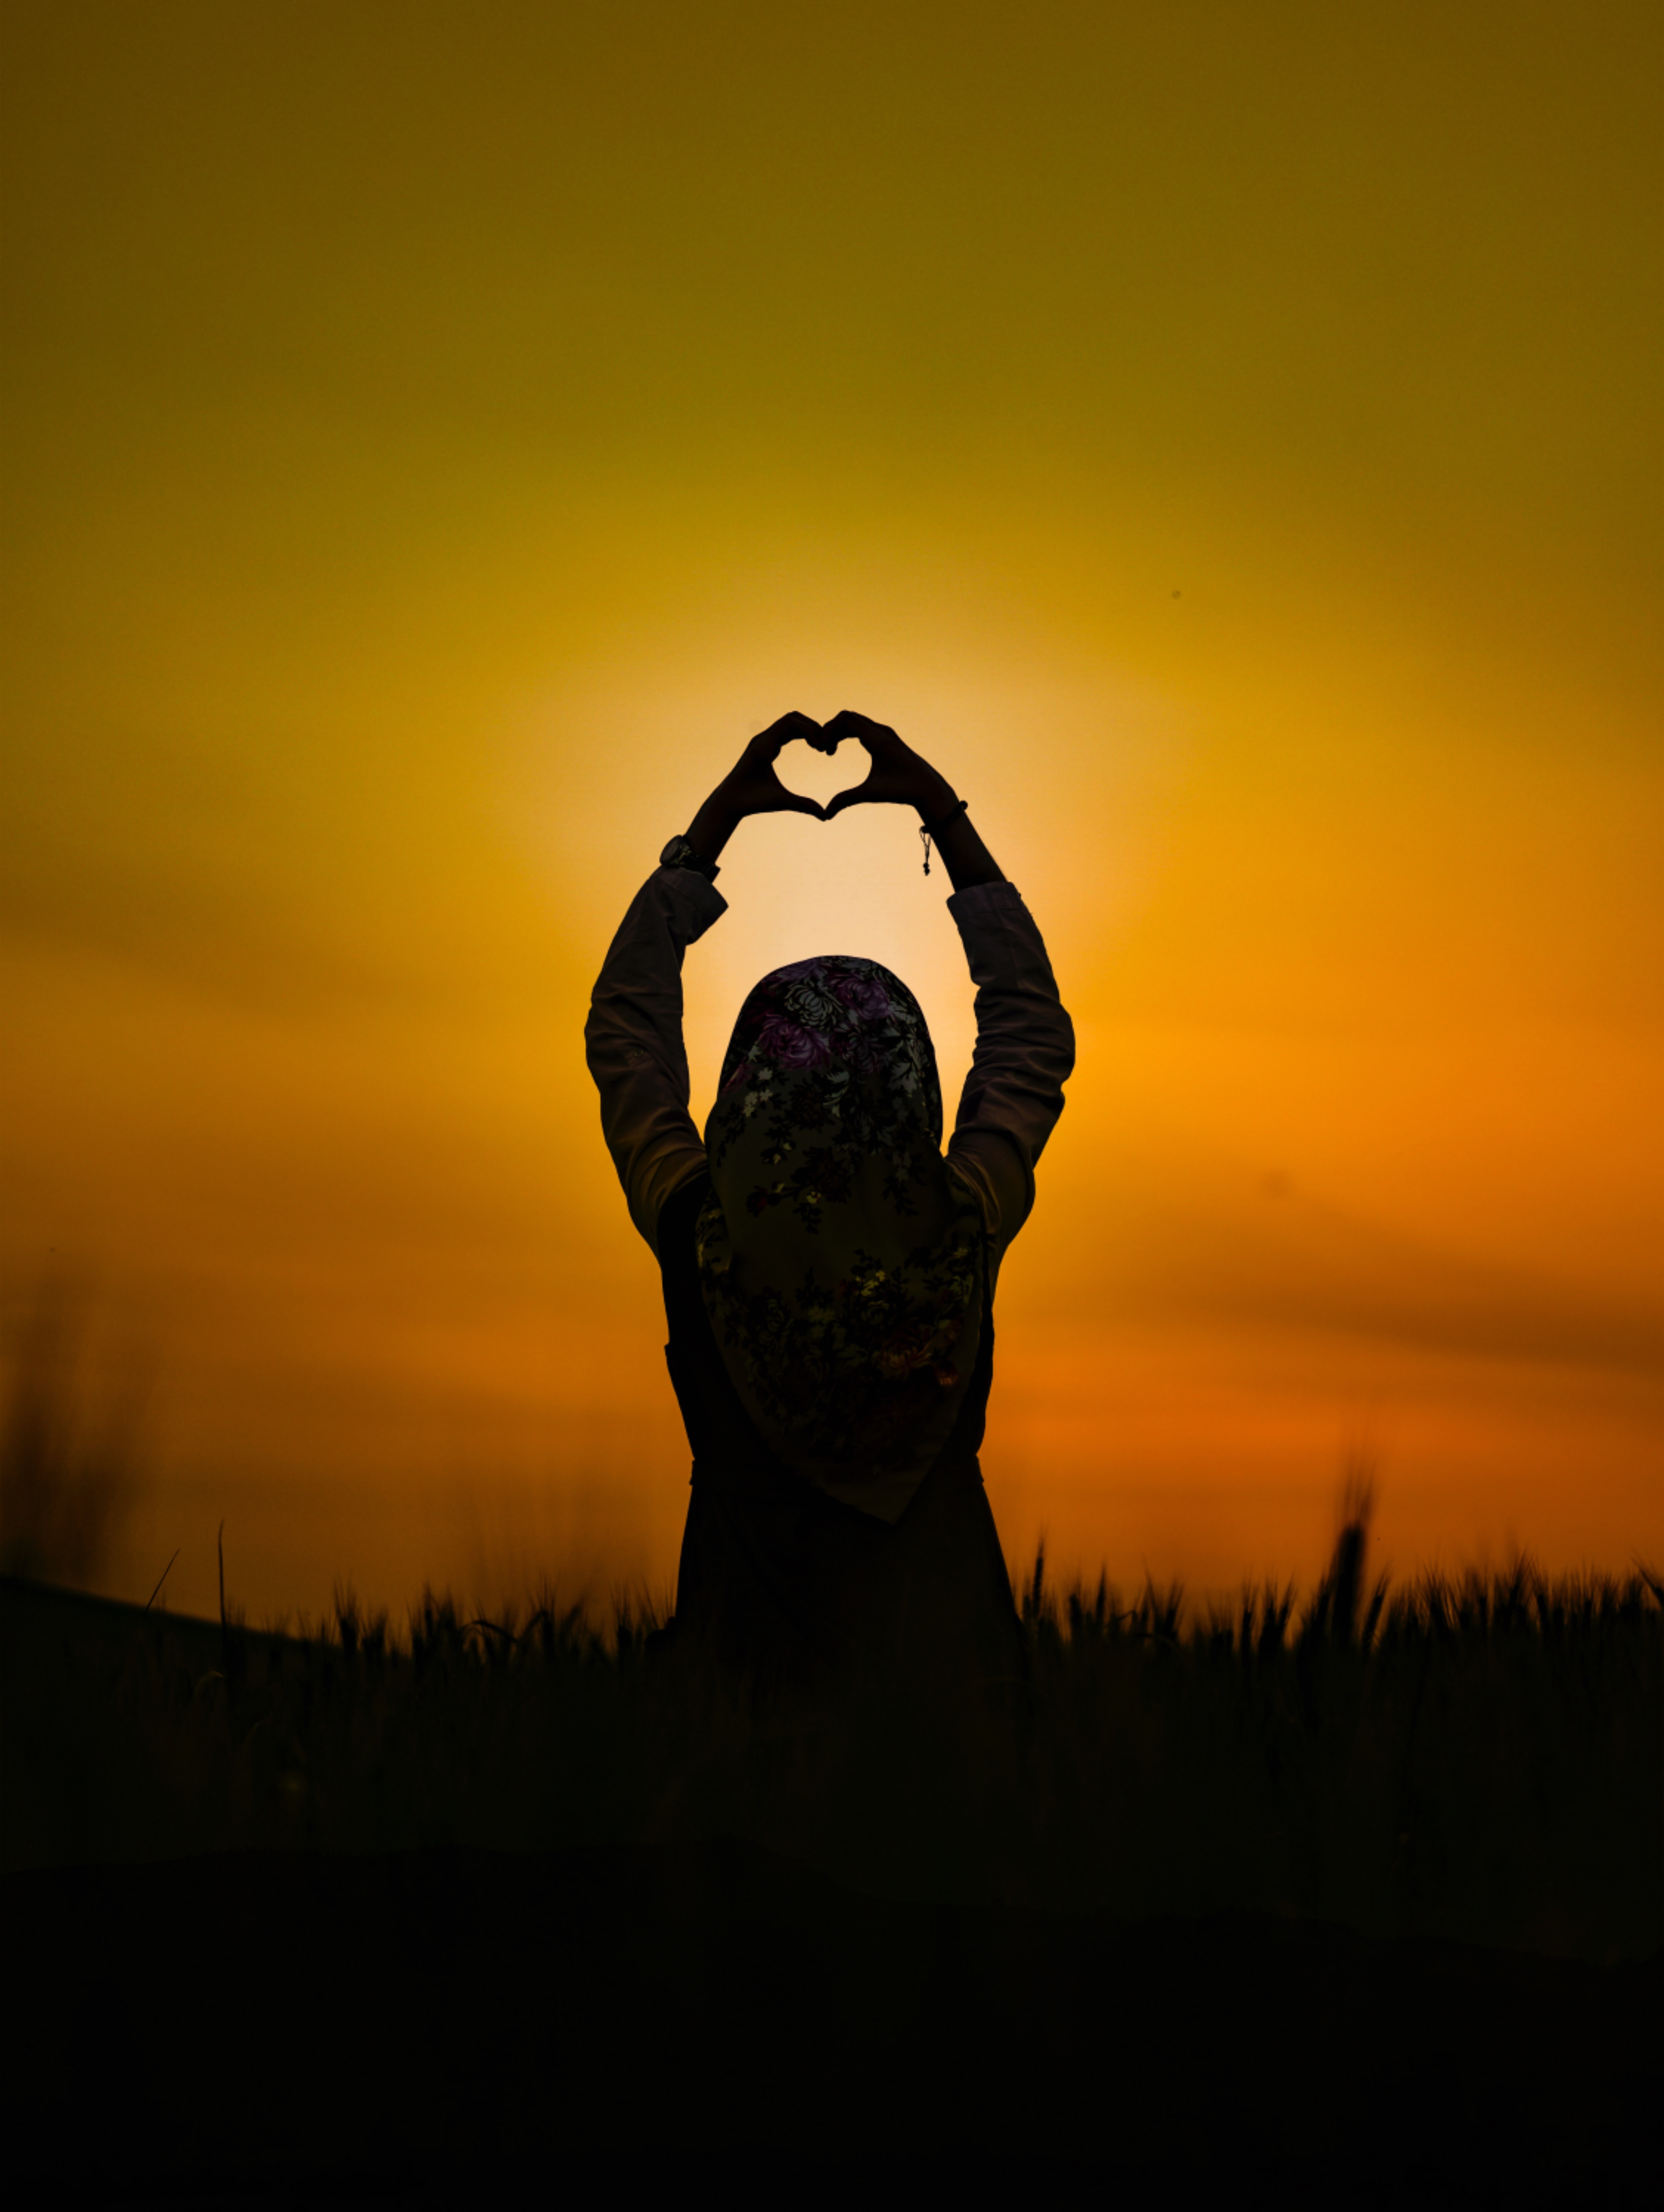 Mobile wallpaper: Girl, Love, Sunset, Silhouette, Heart, 104044 download  the picture for free.